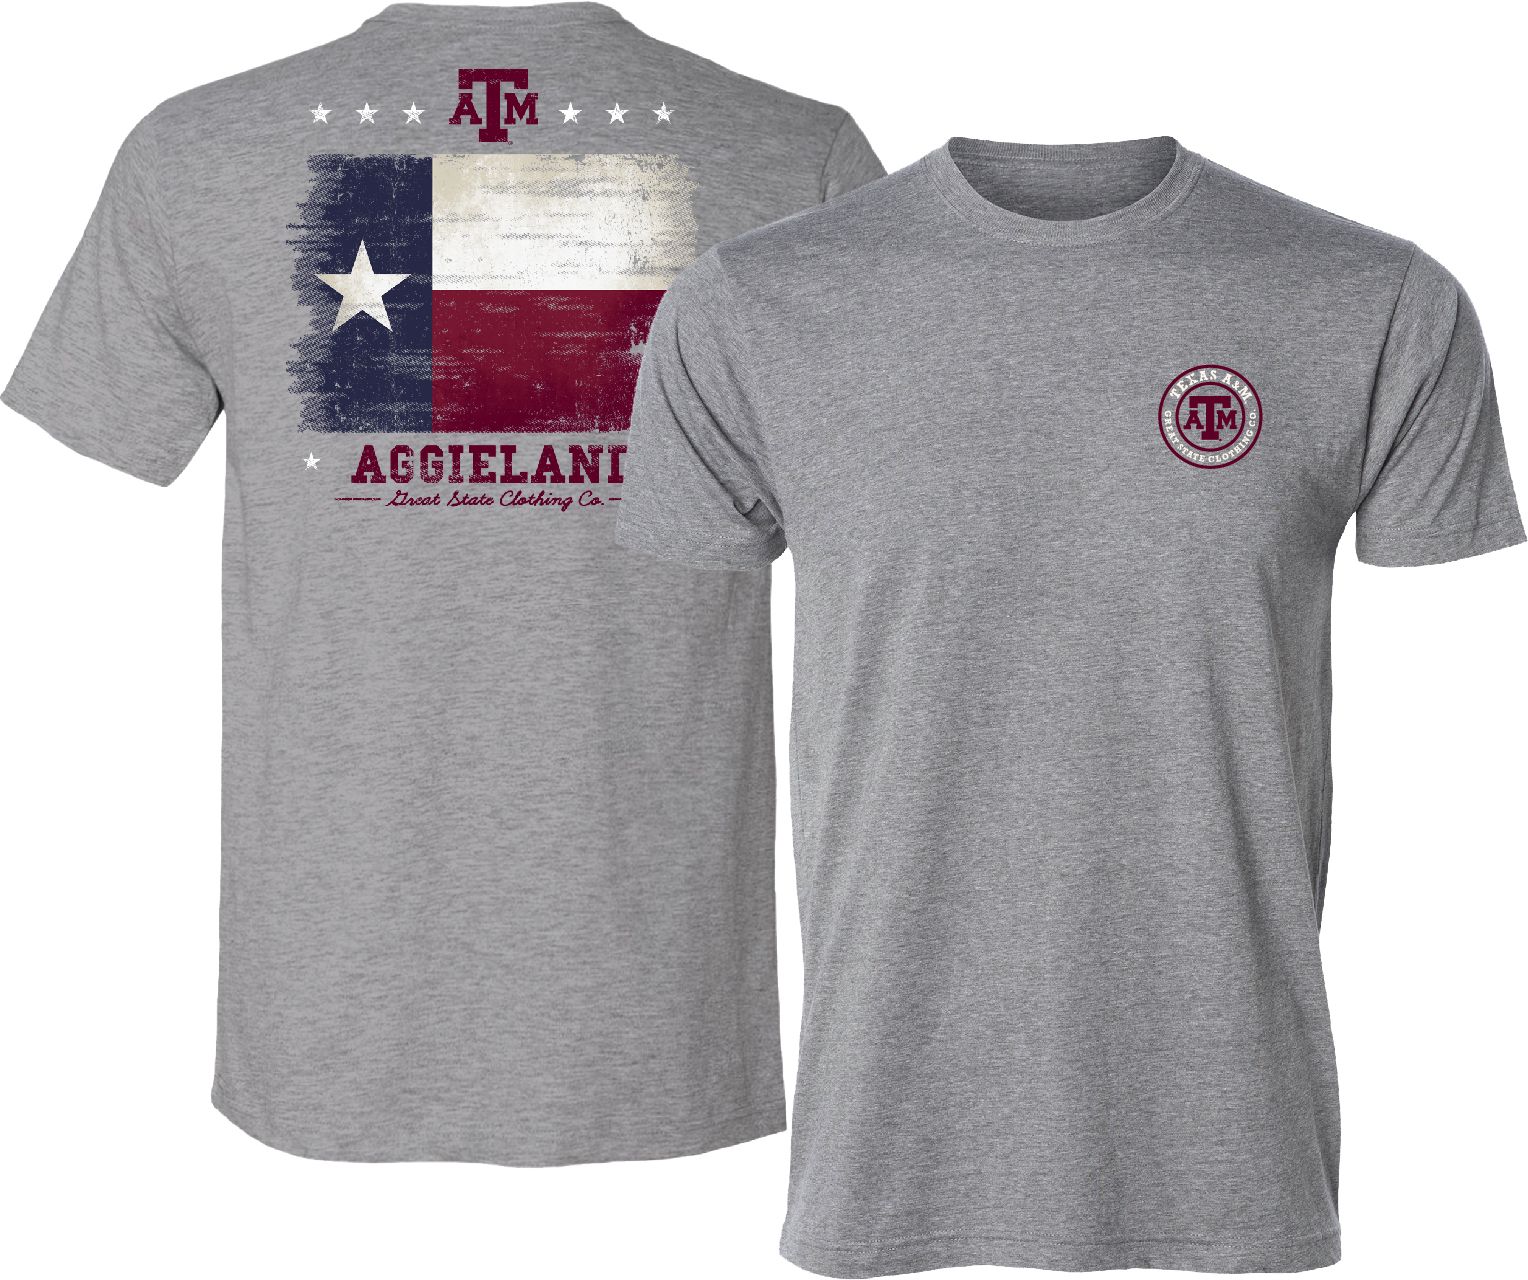 Great State Clothing Men's Texas A&M Aggies Grey Washed Flag T-Shirt